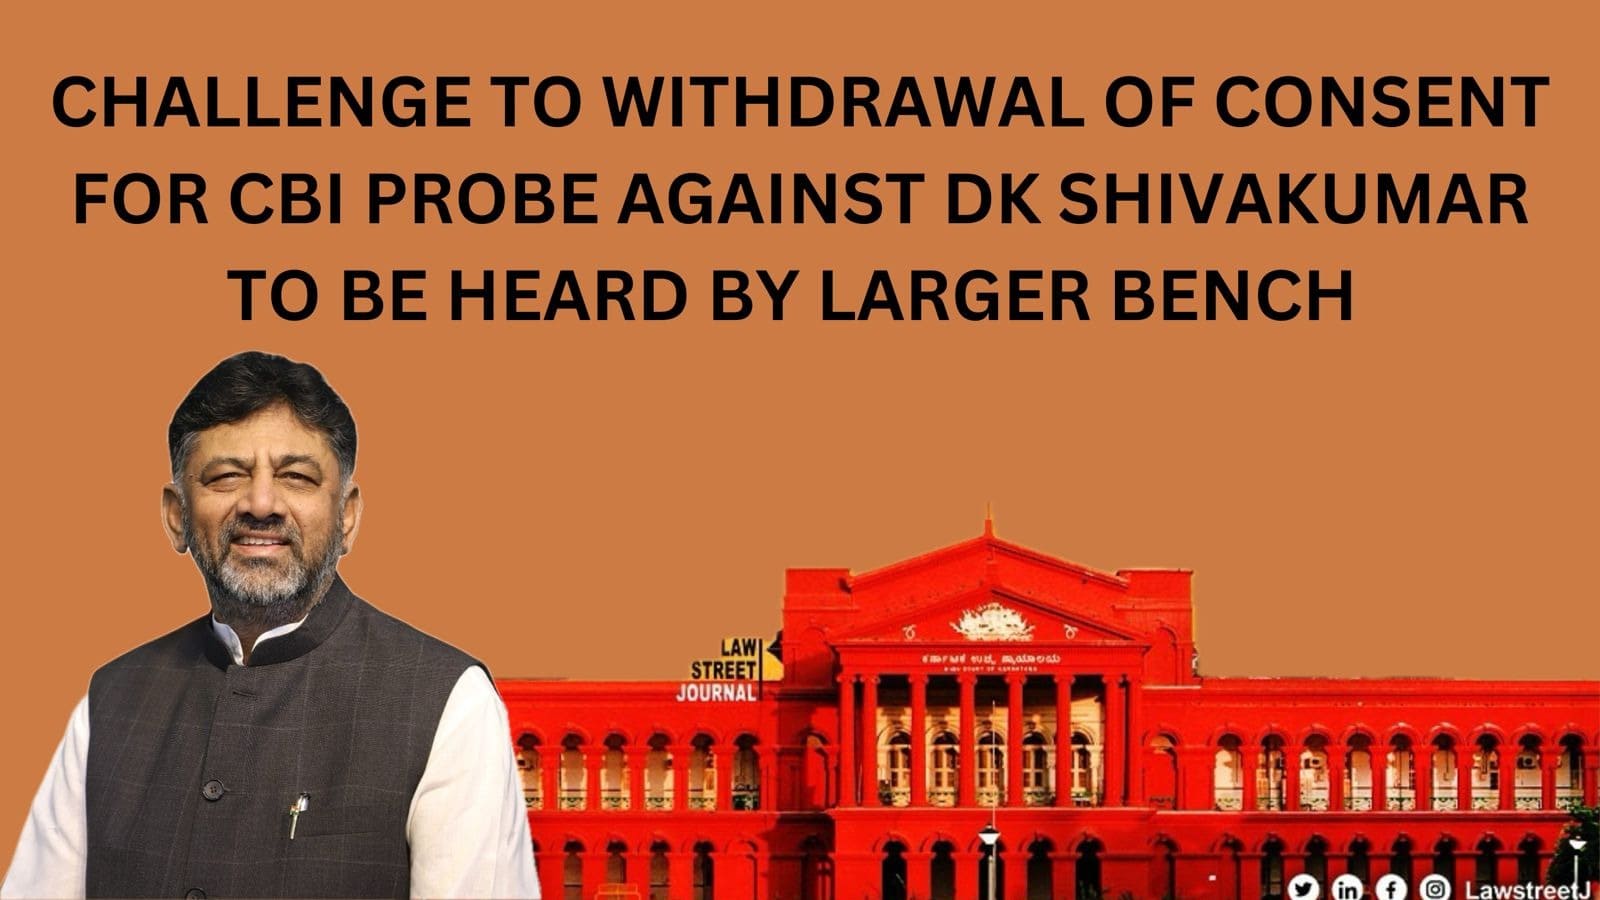 Larger Bench of Karnataka HC to hear petitions against withdrawal of consent for CBI probe against DK Shivakumar